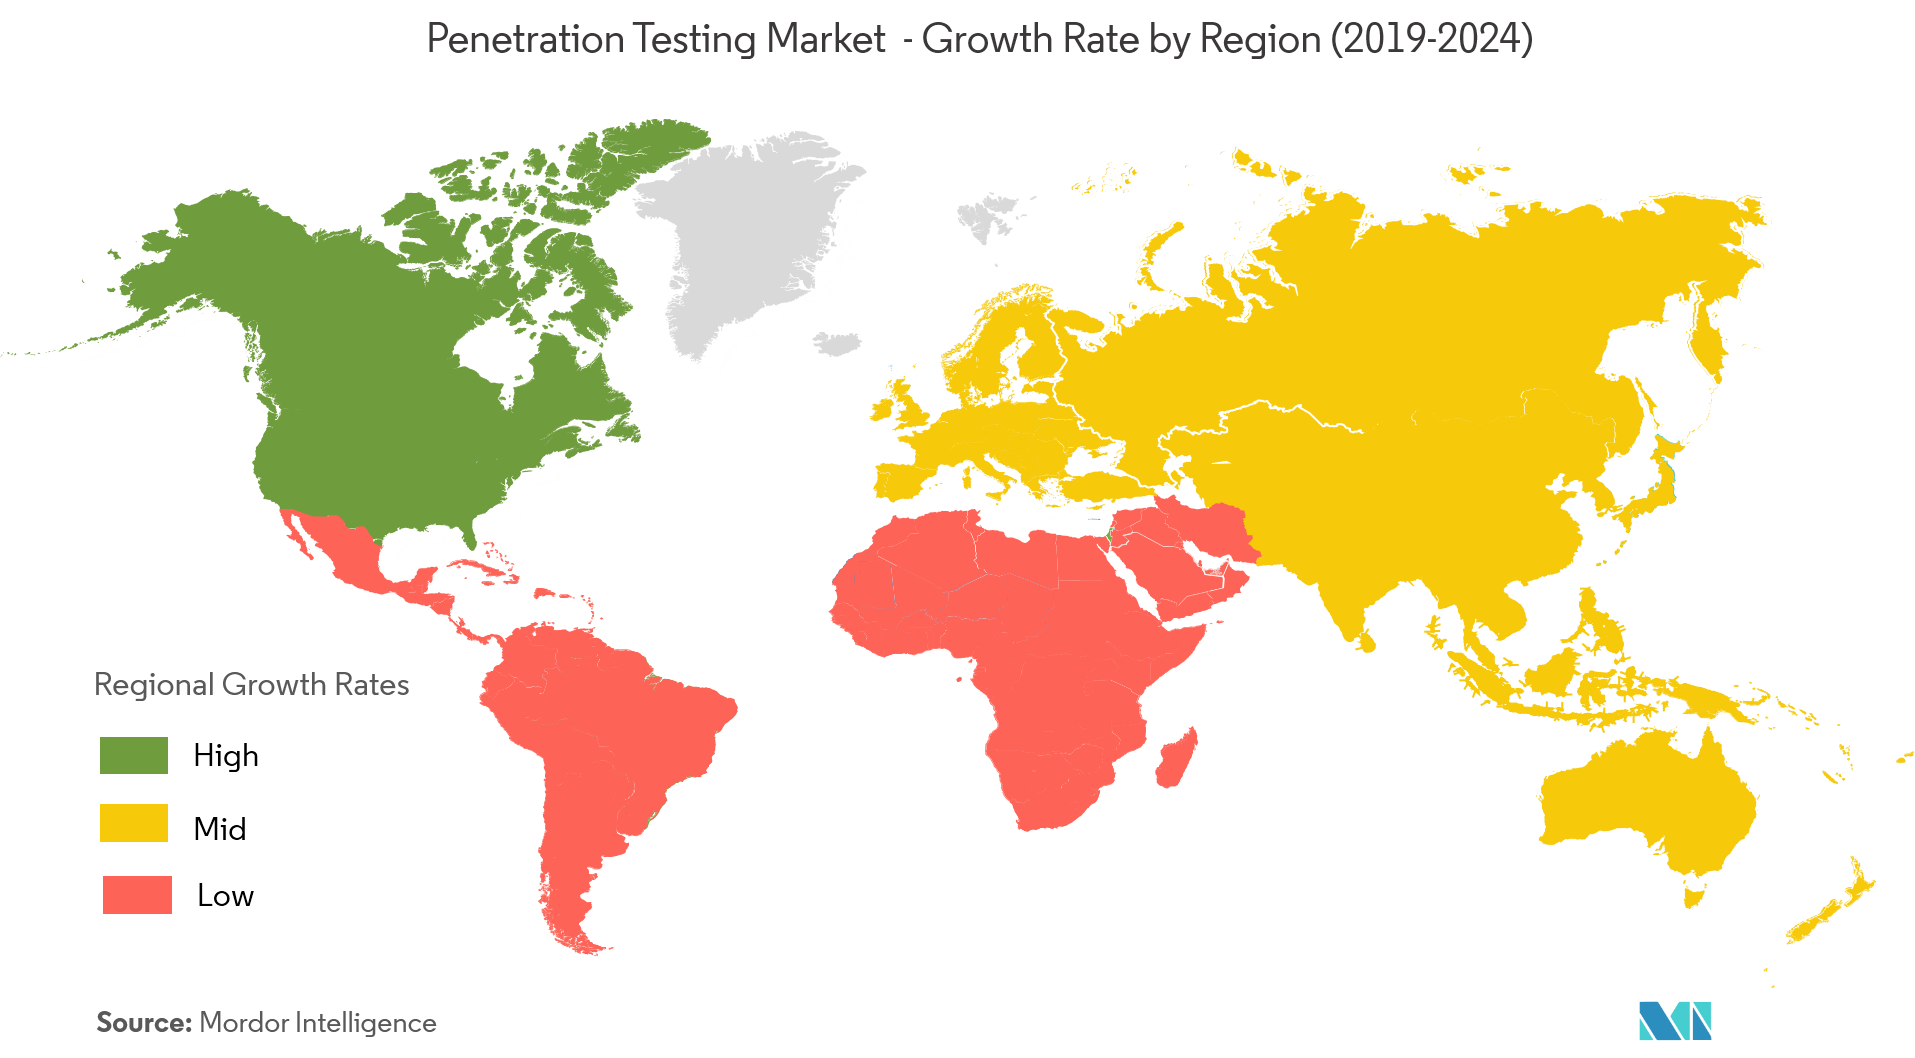 Penetration Testing Market - Growth Rate by Region (2019-2024)